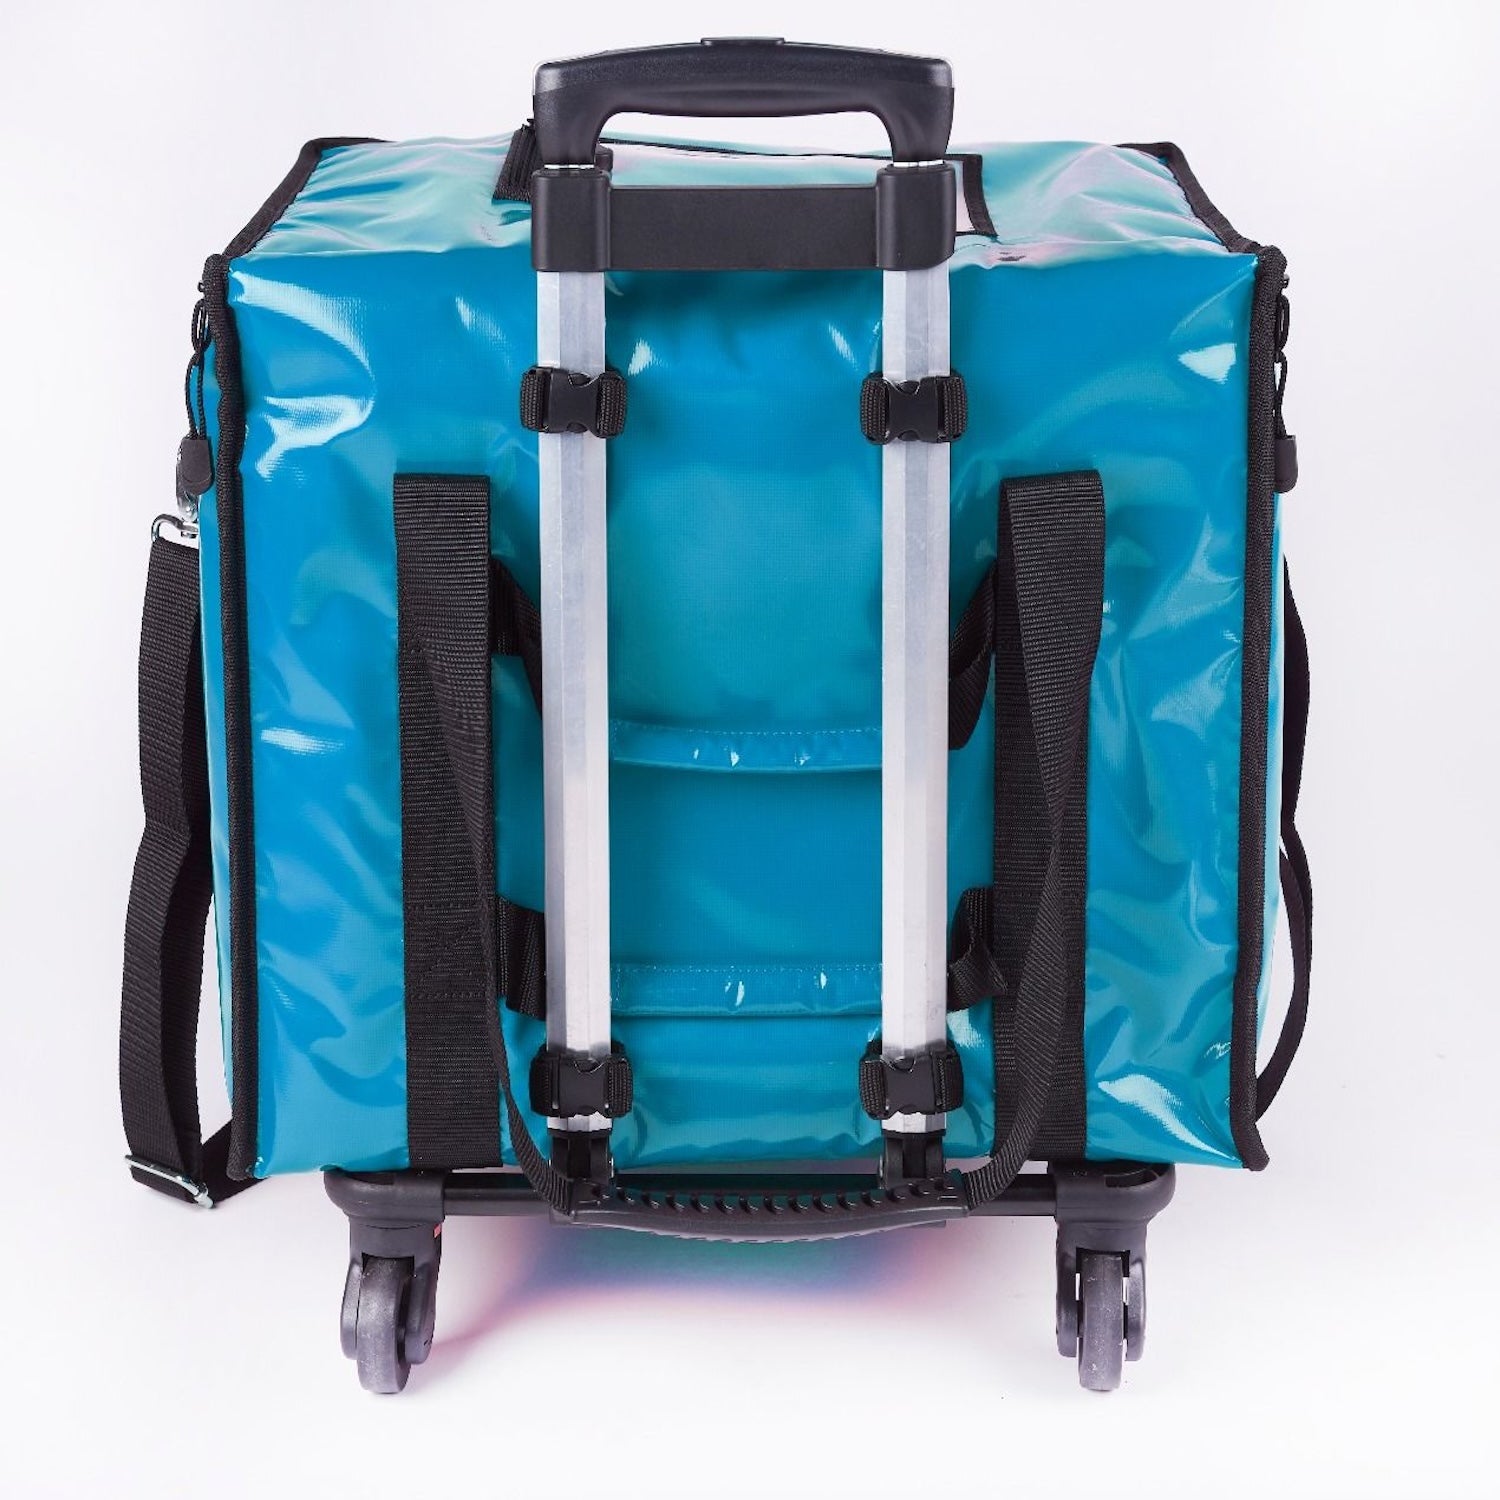 Thermal Carry Bag Trolley